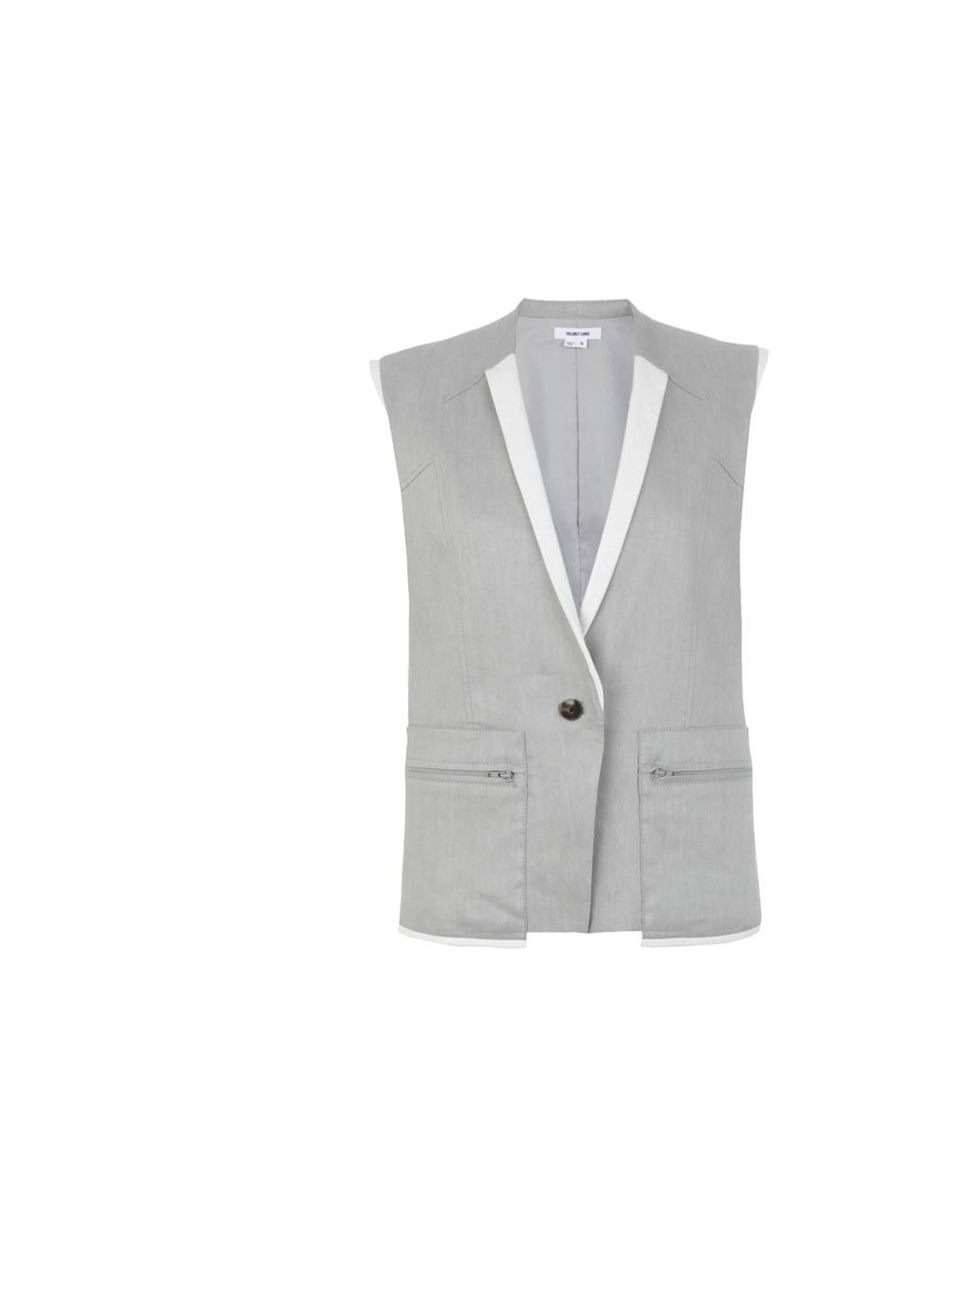 <p>Helmut Lang glossy linen sleeveless jacket, £435, at <a href="http://www.harrods.com/product/glossy-linen-vest/helmut-lang/000000000003134064?cat1=bc-helmut-lang&amp;cat2=bc-helmut-lang-all">Harrods.com</a></p>